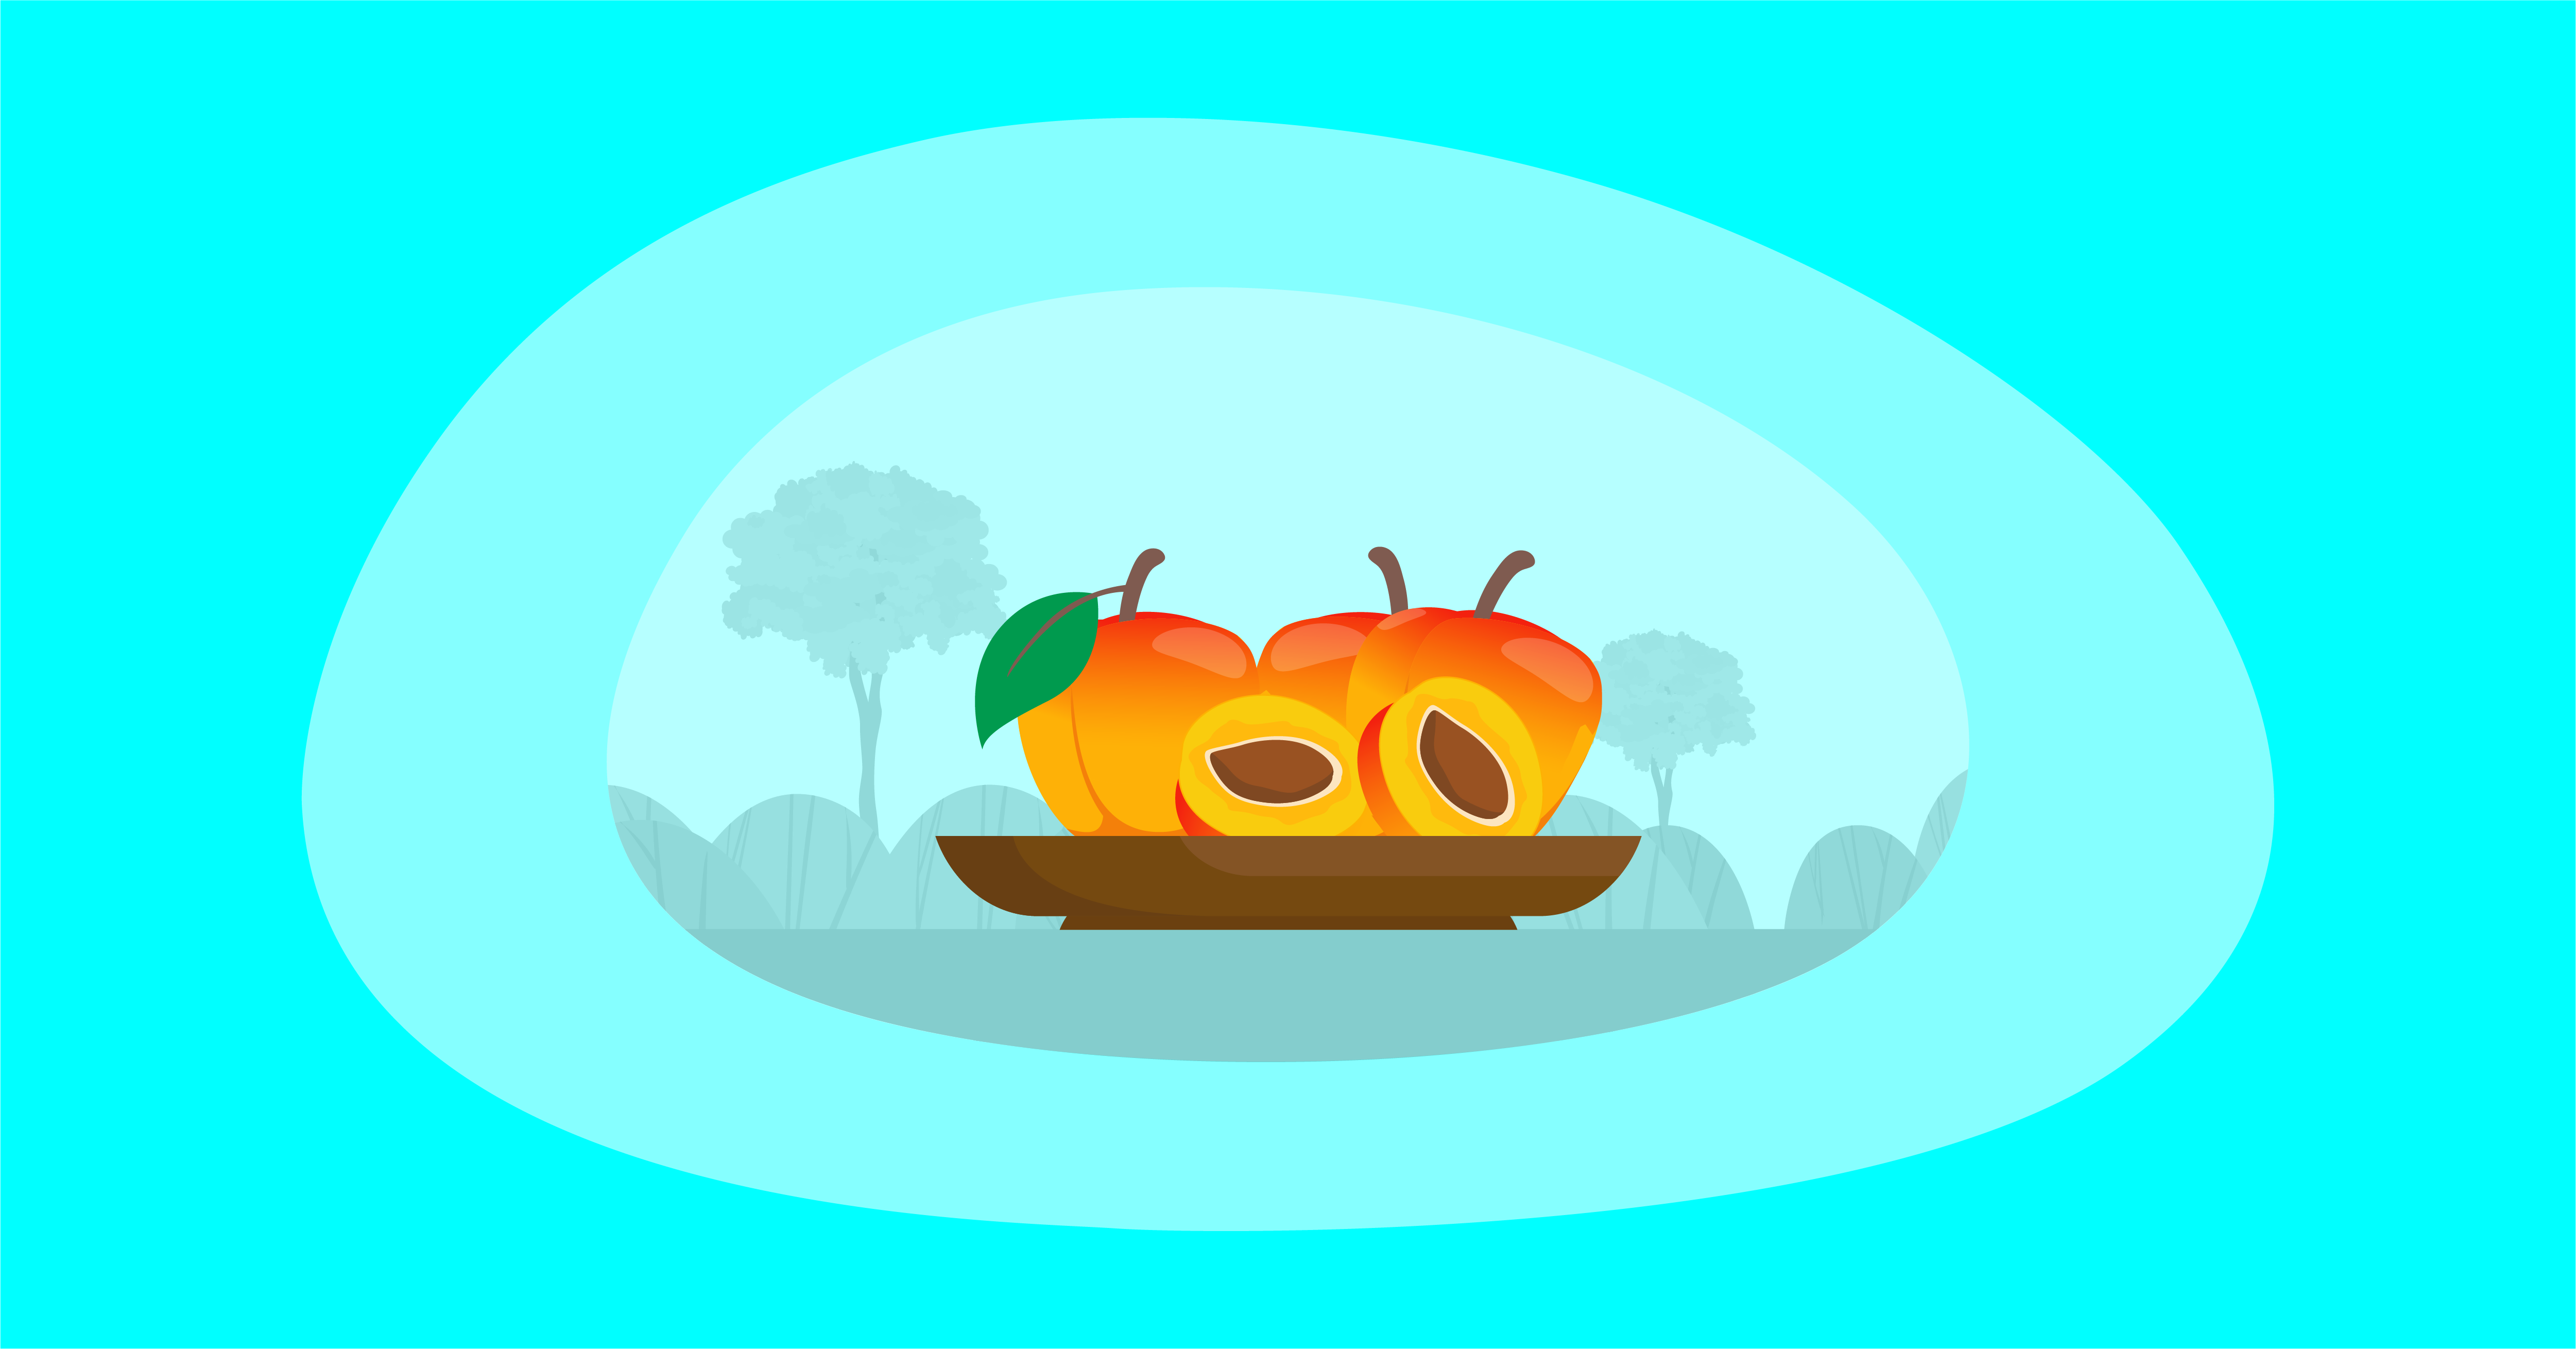 Illustration of apricots in a wooden platter